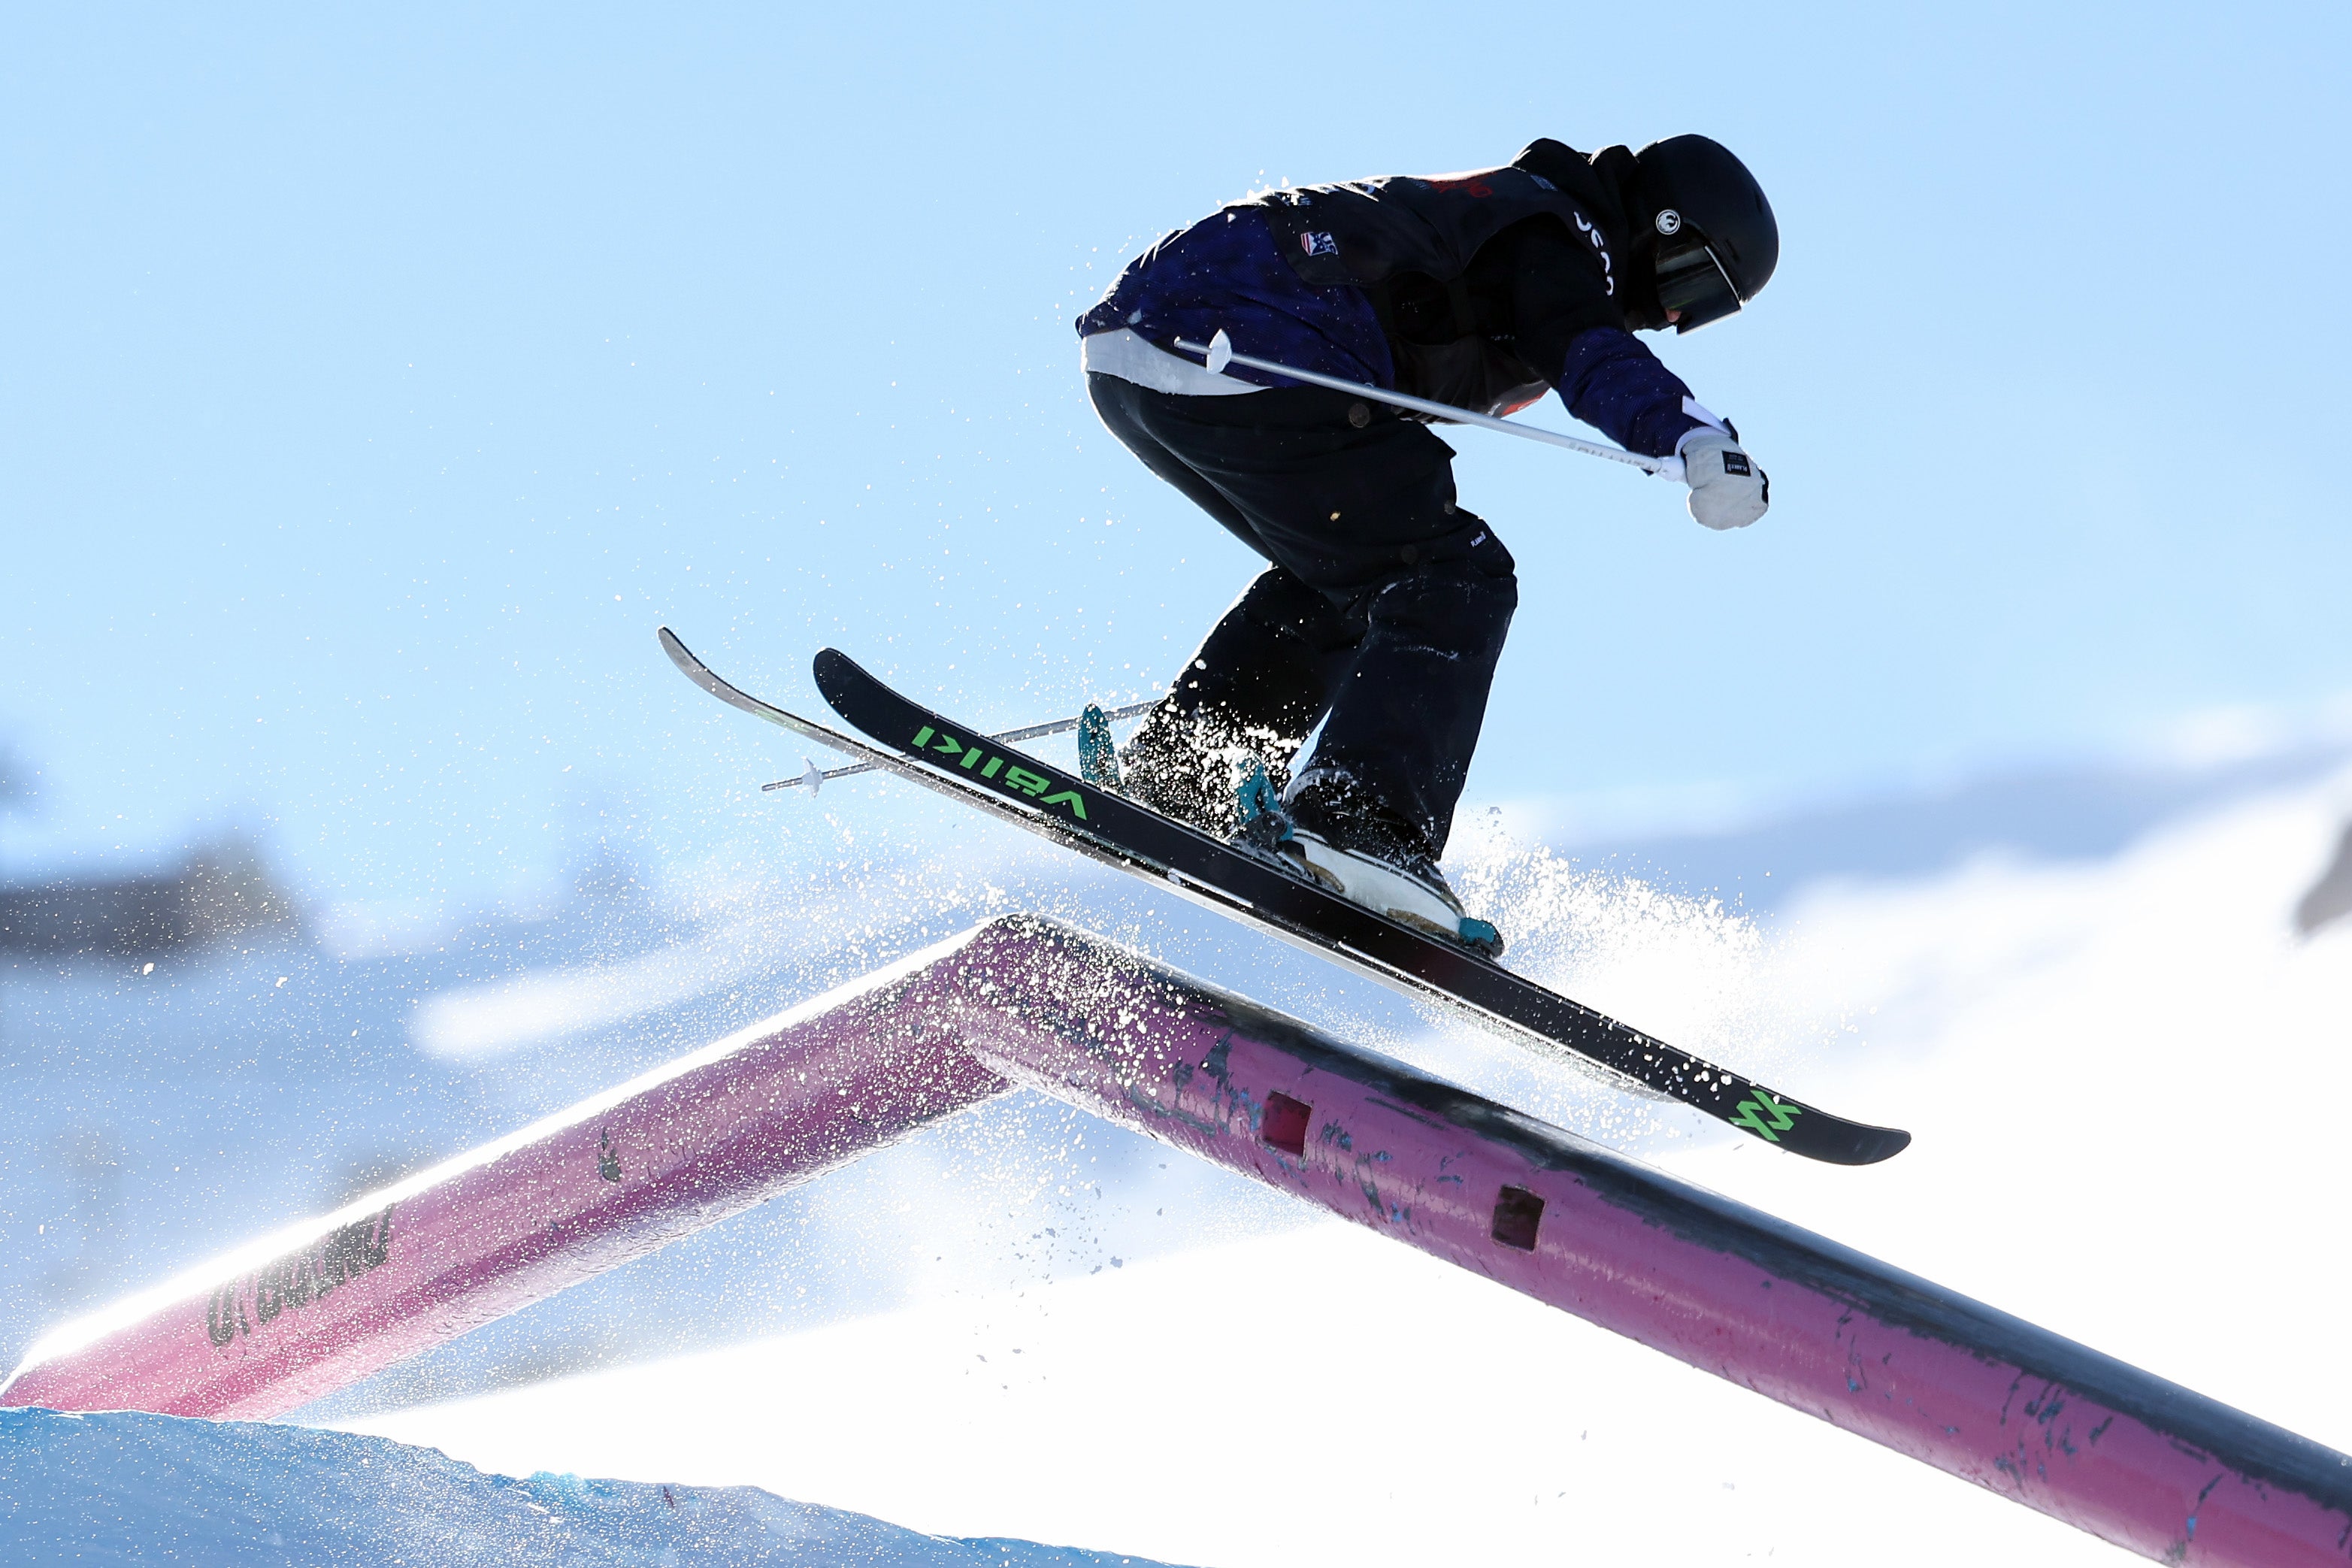 Kirsty Muir competing in the Women’s Freeski Slopestyle competition at the US Grand Prix at Mammoth Mountain